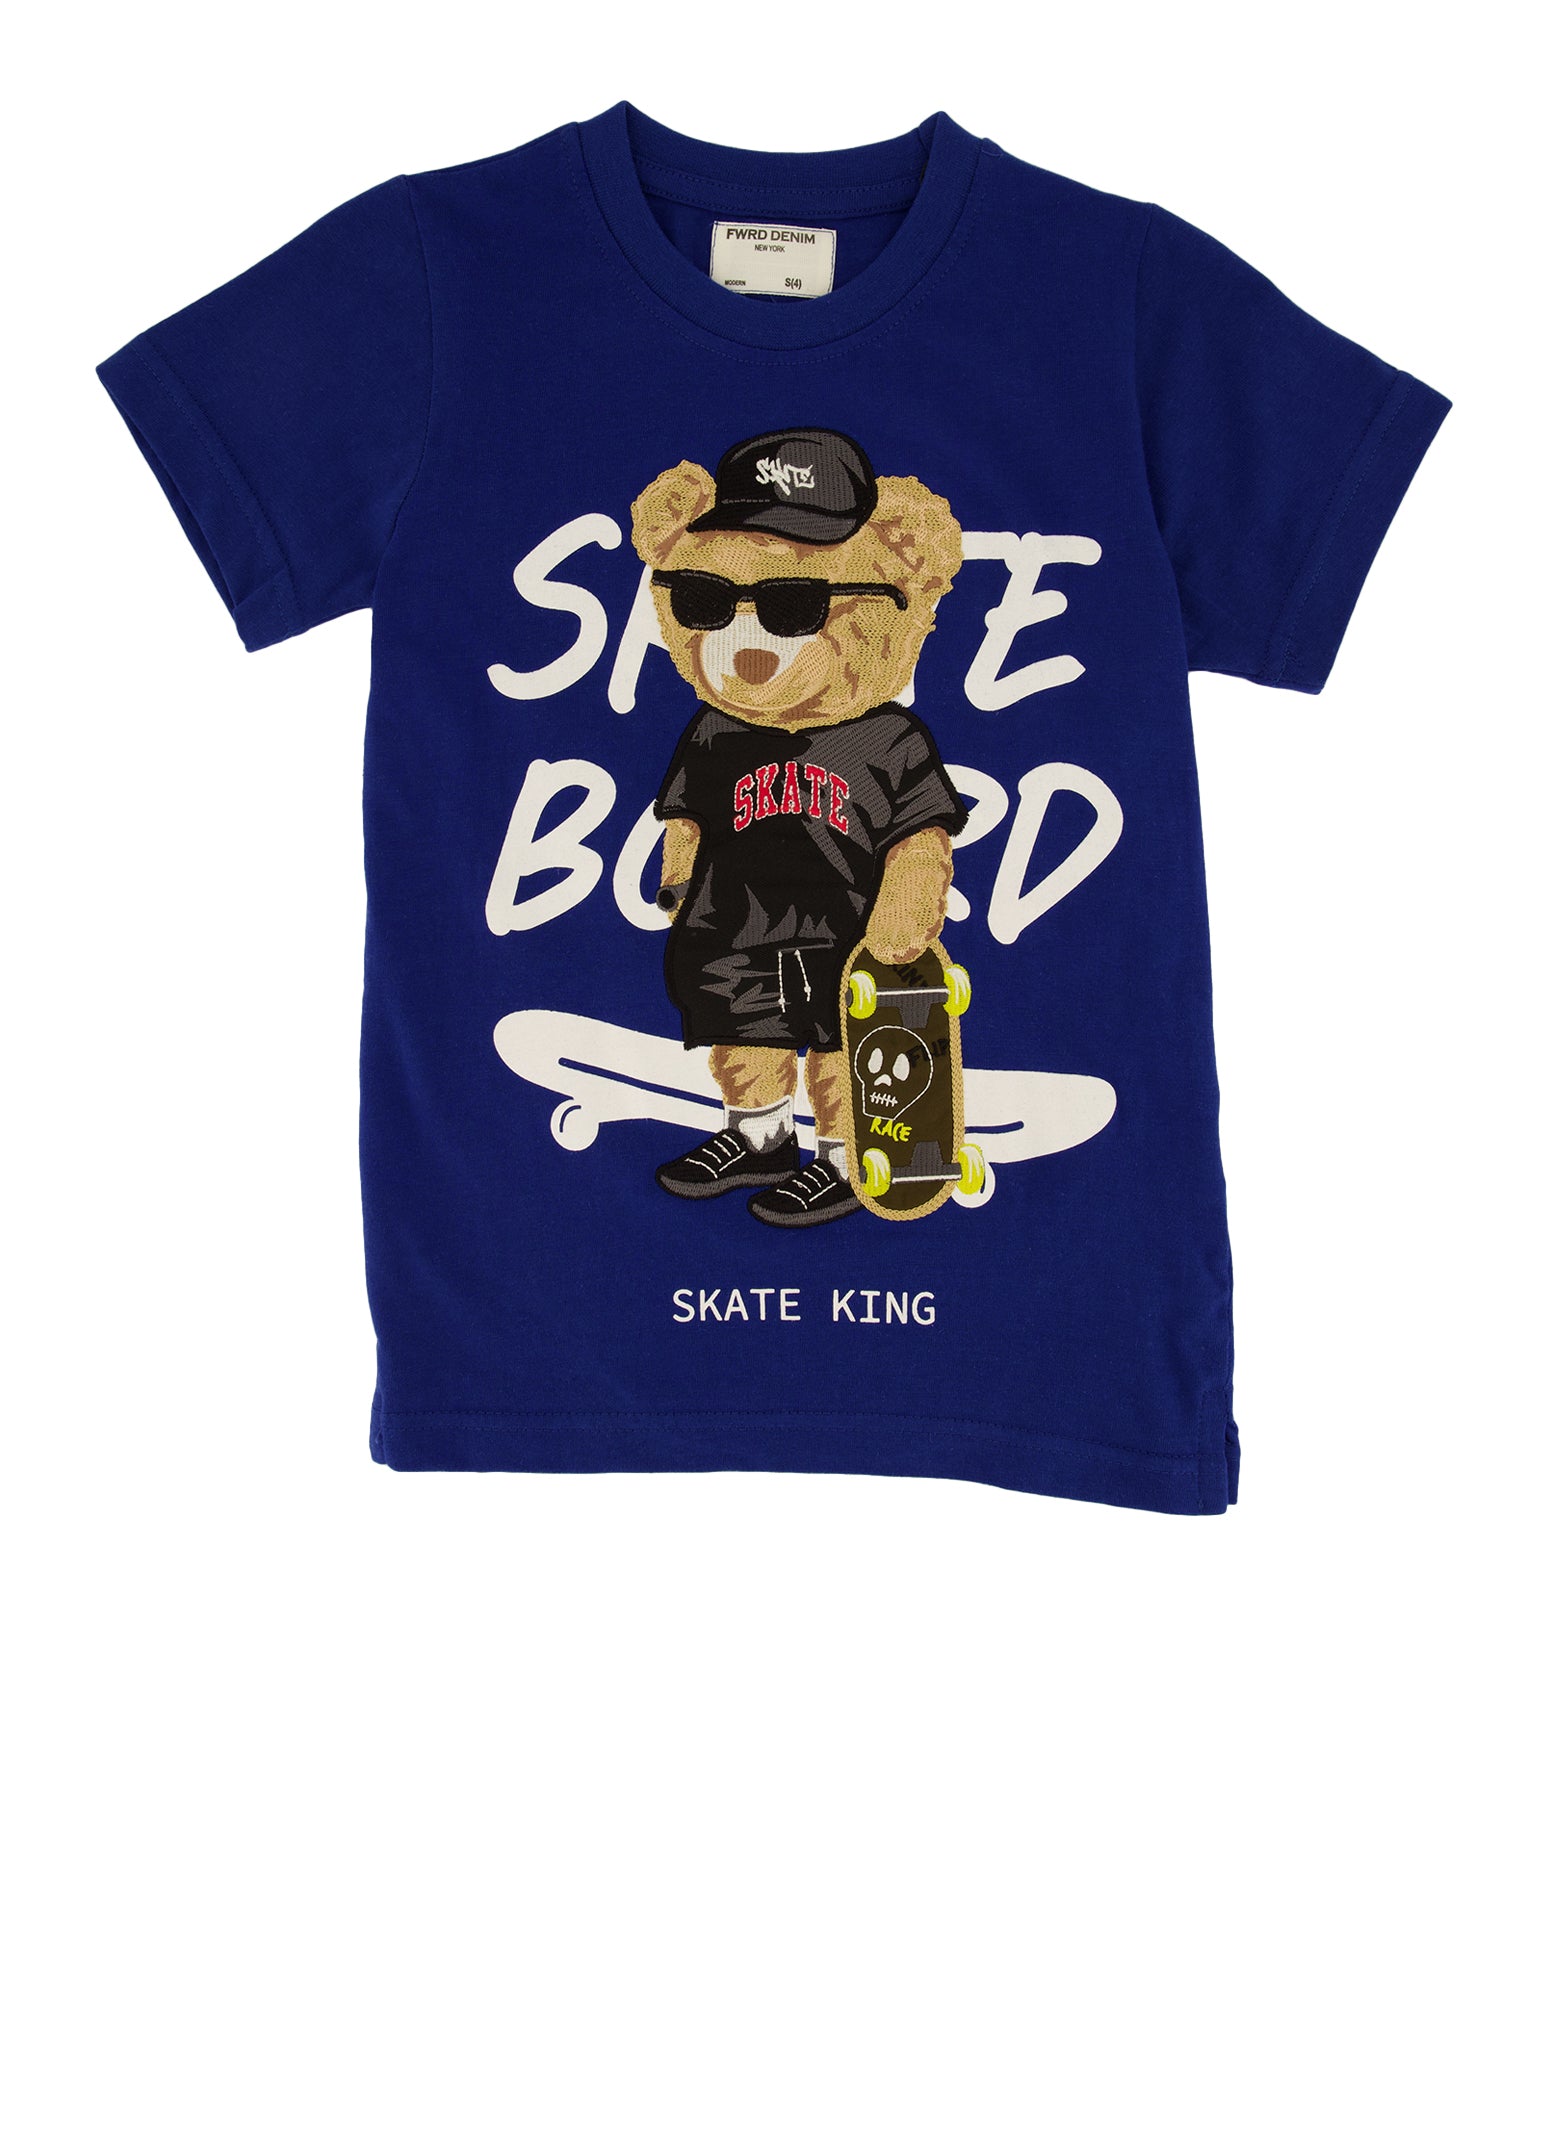 Little Boys Skate King Embroidered Graphic Tee, Blue, Size 7